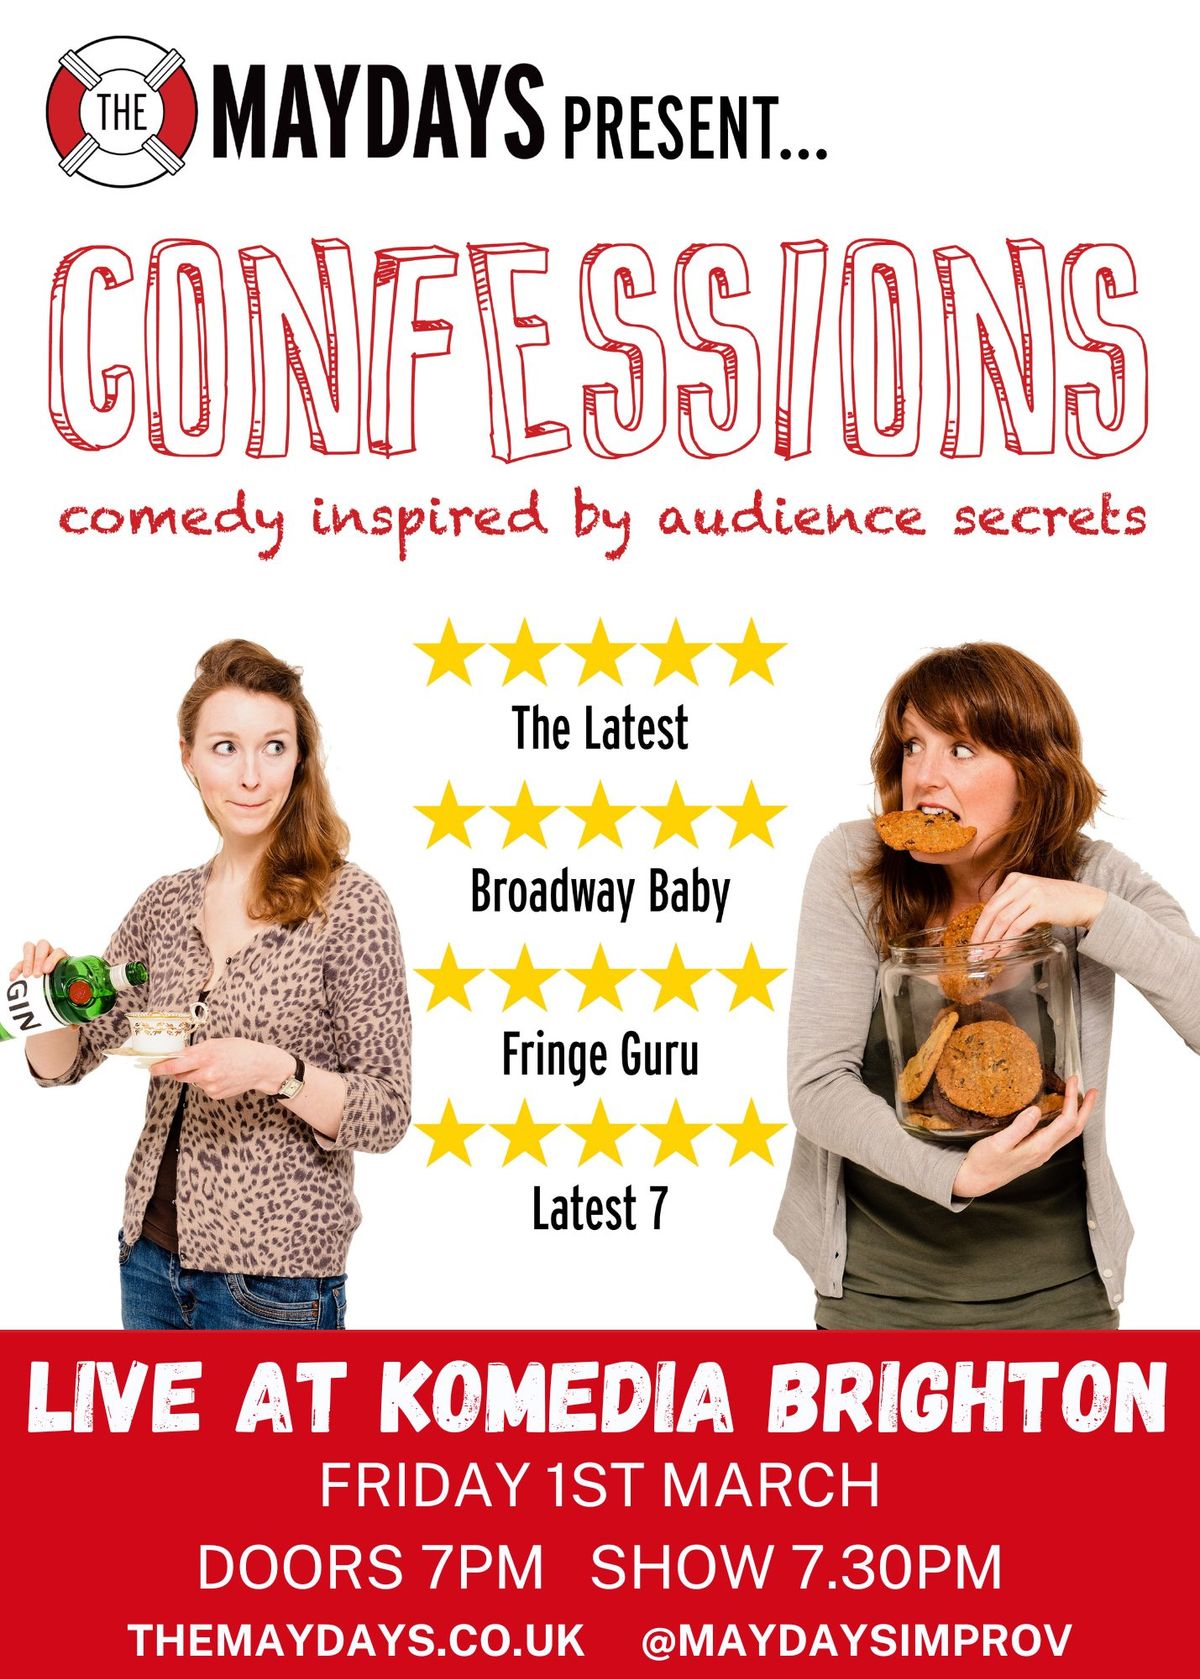 The Maydays present: Confessions